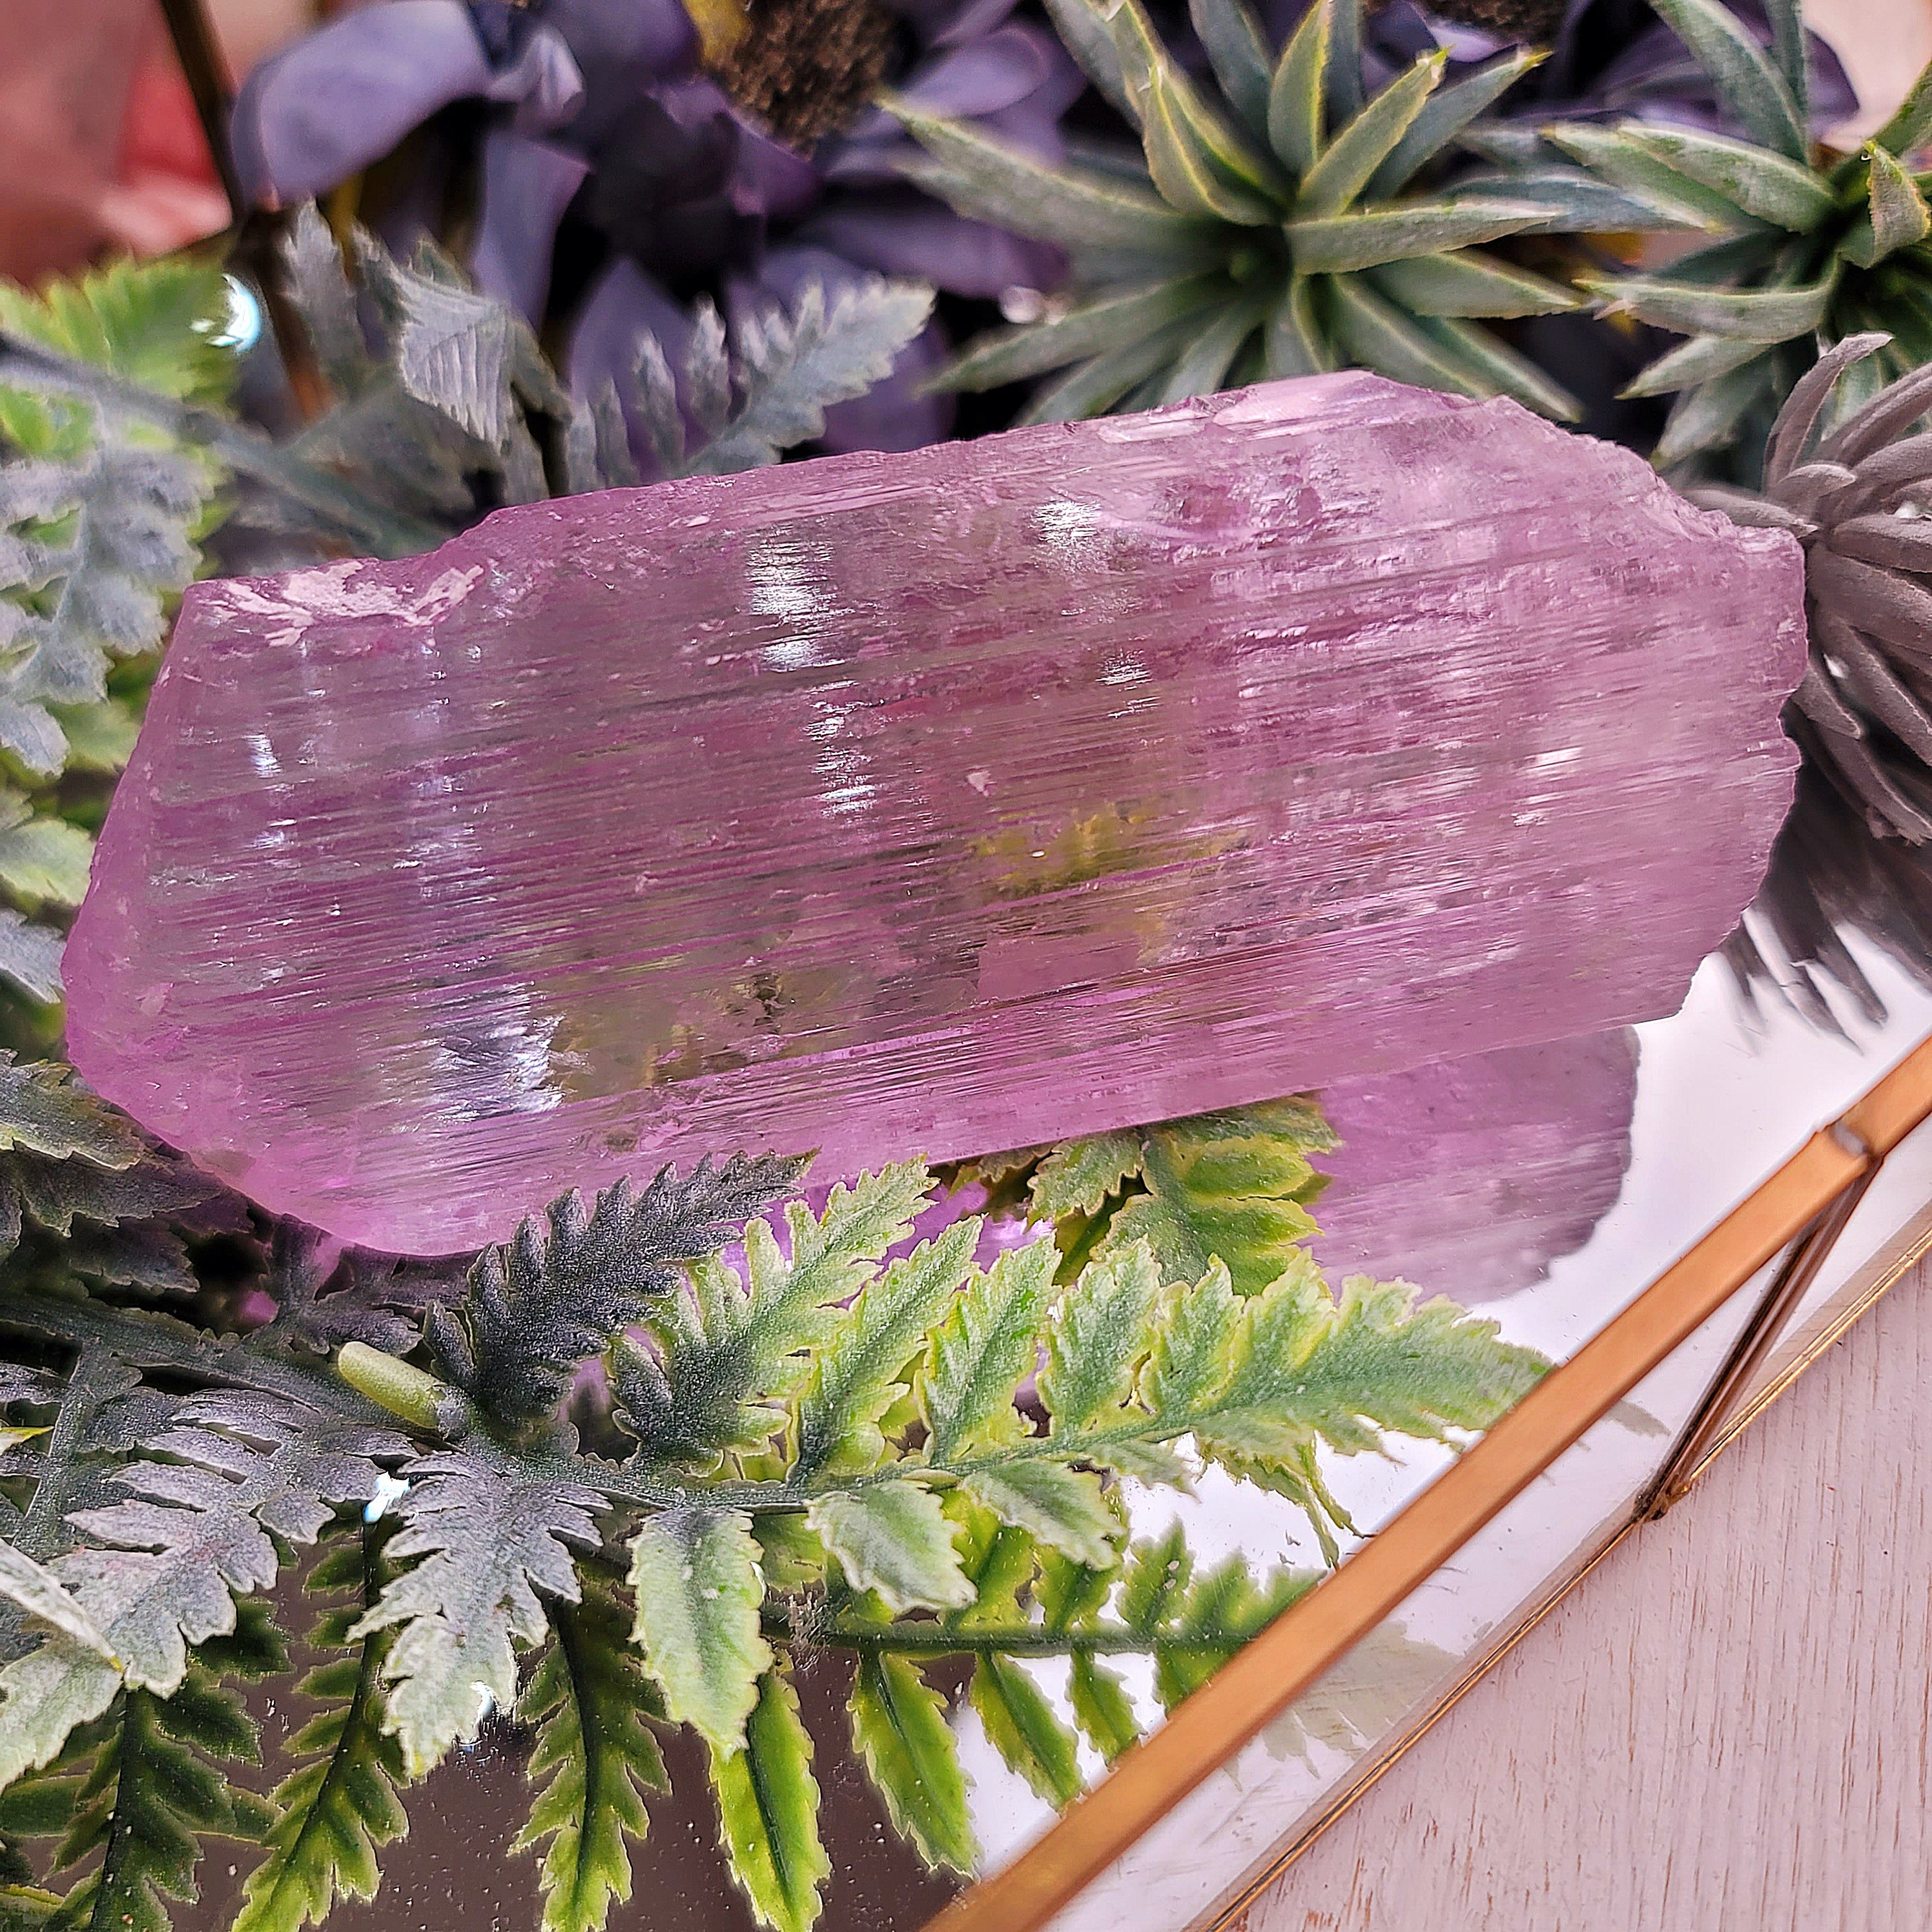 Kunzite Specimen for Emotional, Family Healing and Opening Your Heart to Love